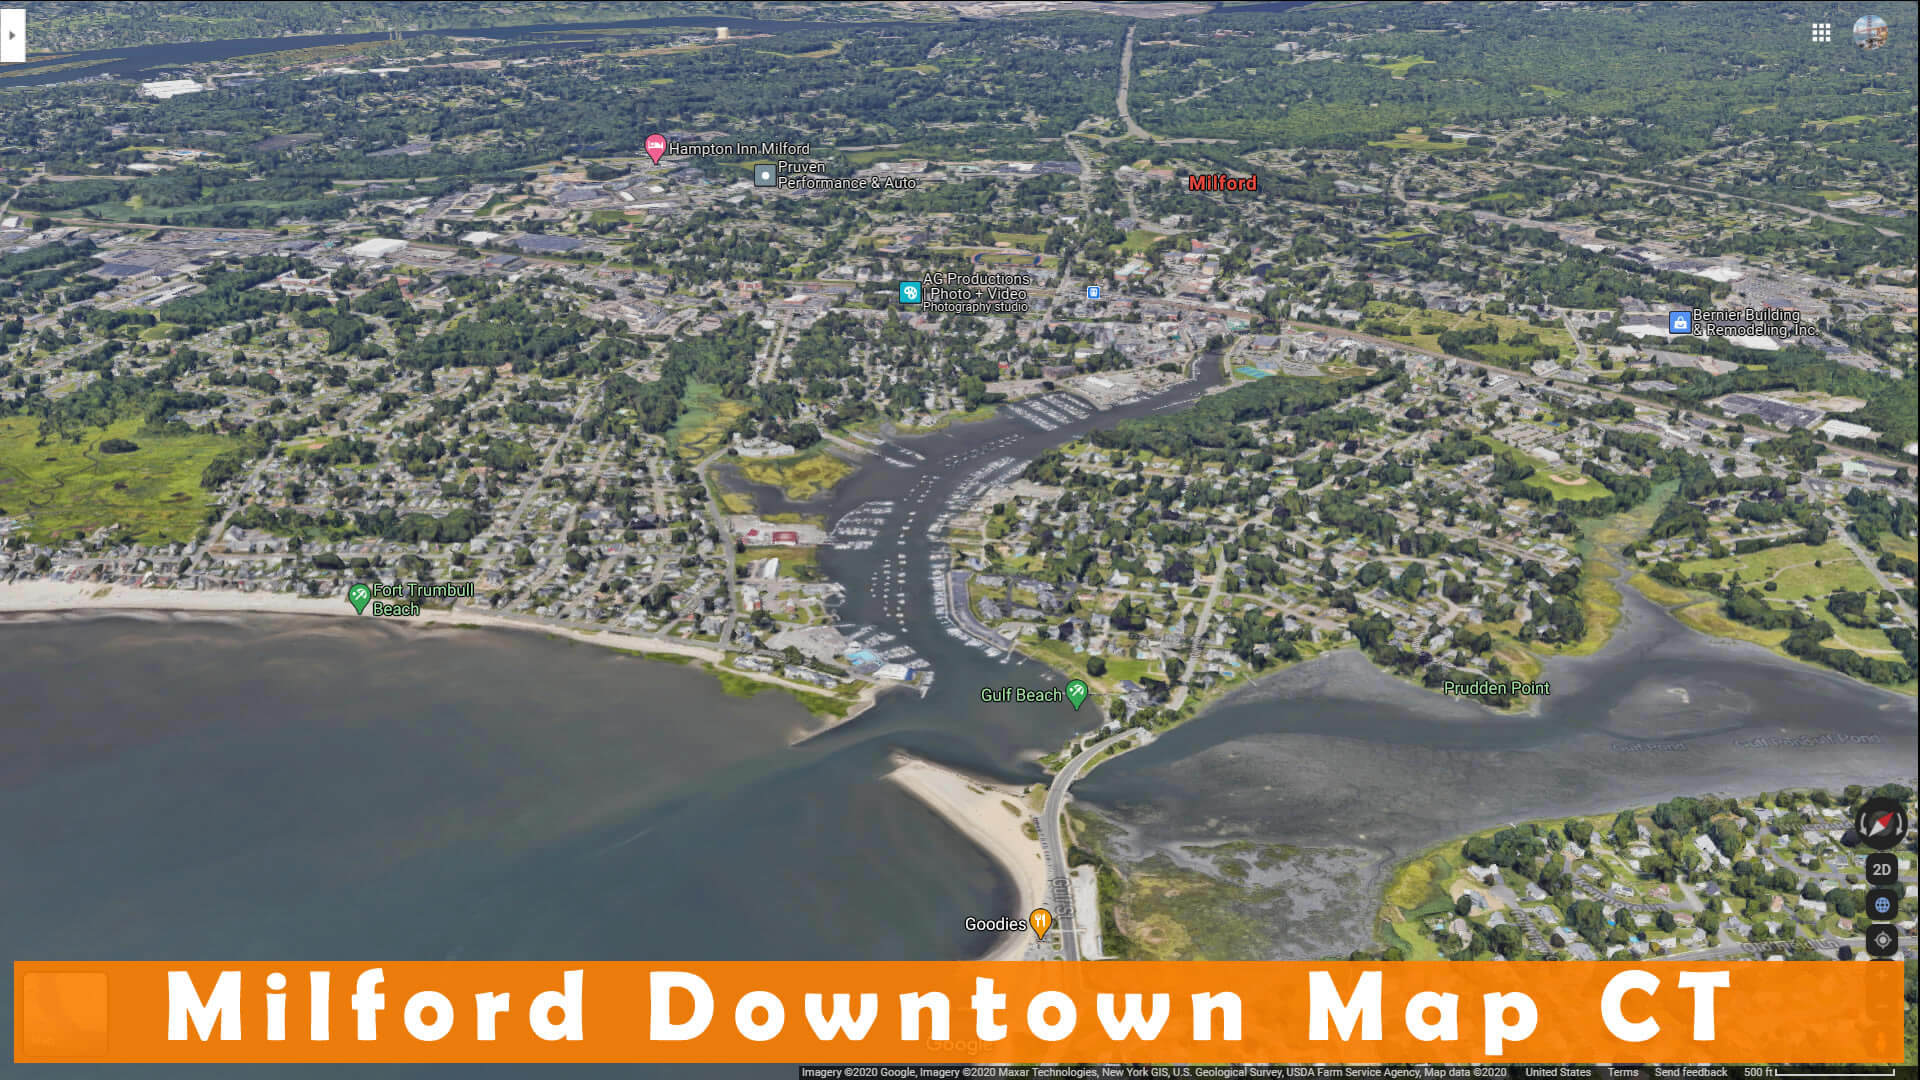 Milford Downtown Map CT